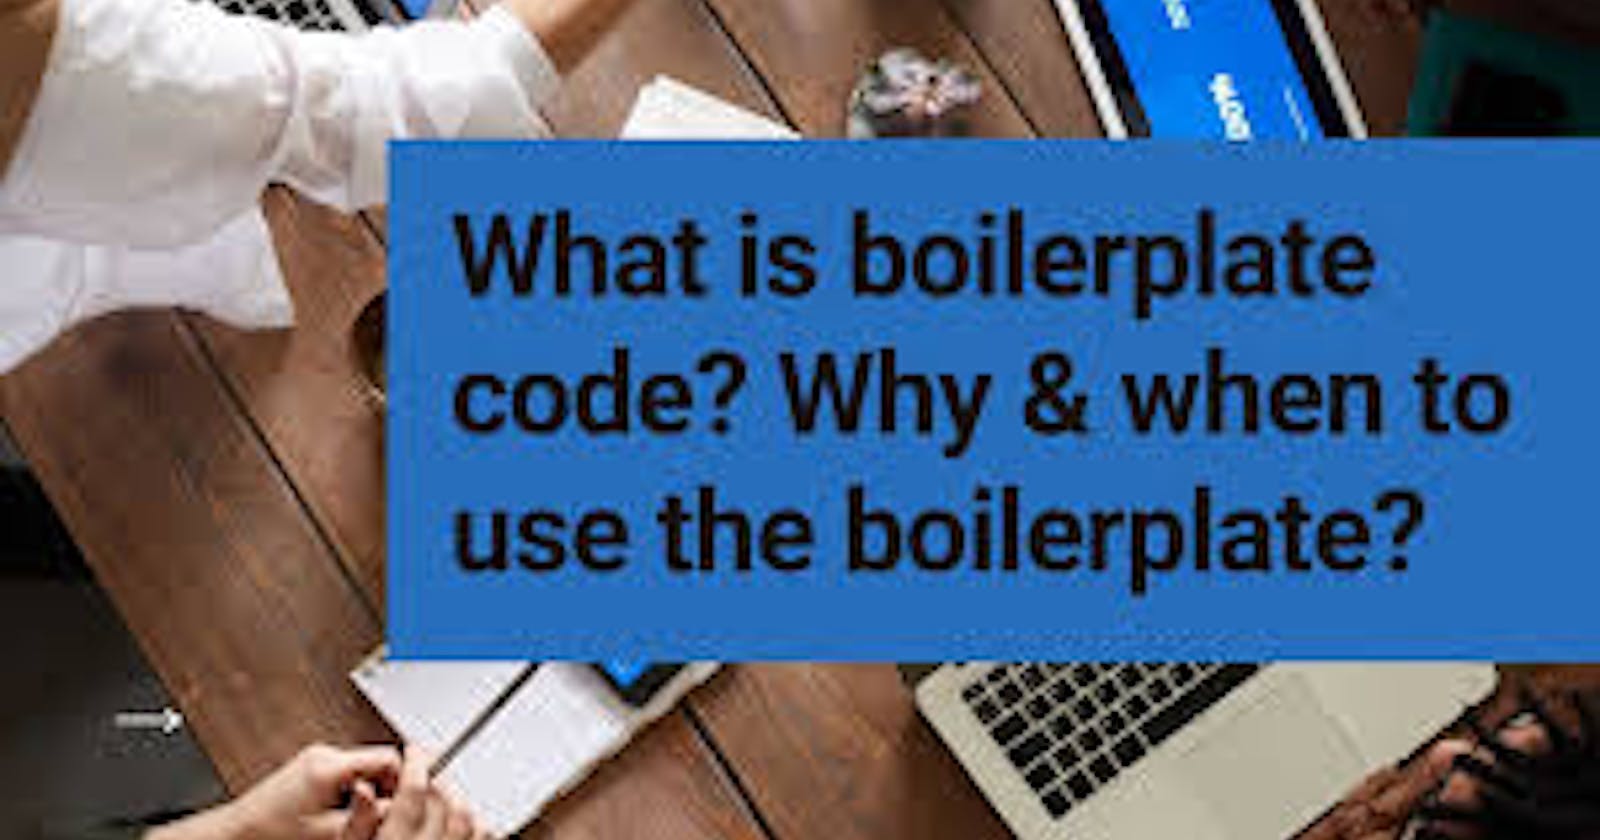 What is a boilerplate code? And why use it?